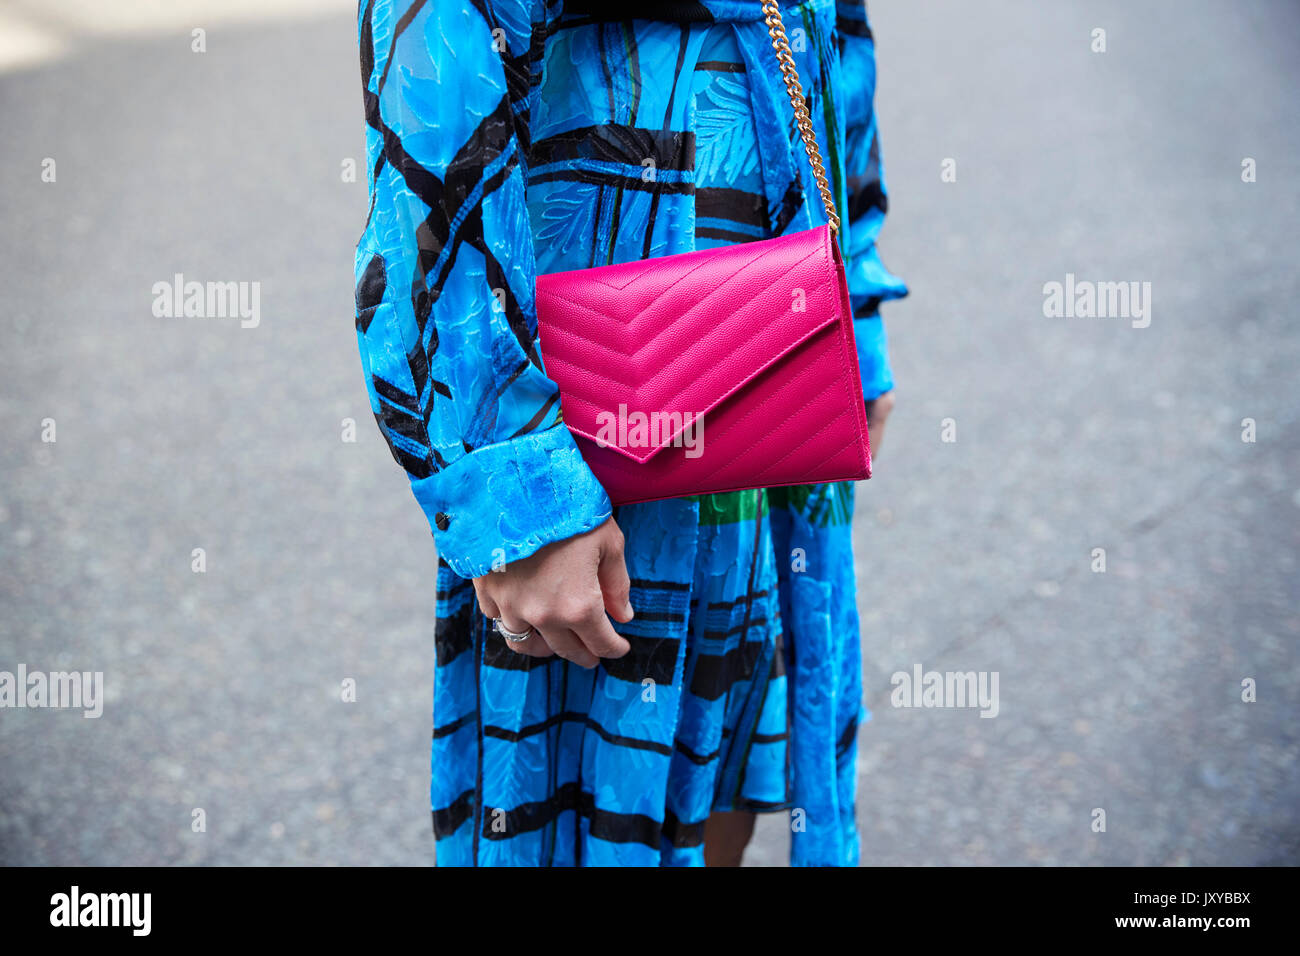 Mid section of a woman in blue dress with pink leather bag Stock Photo